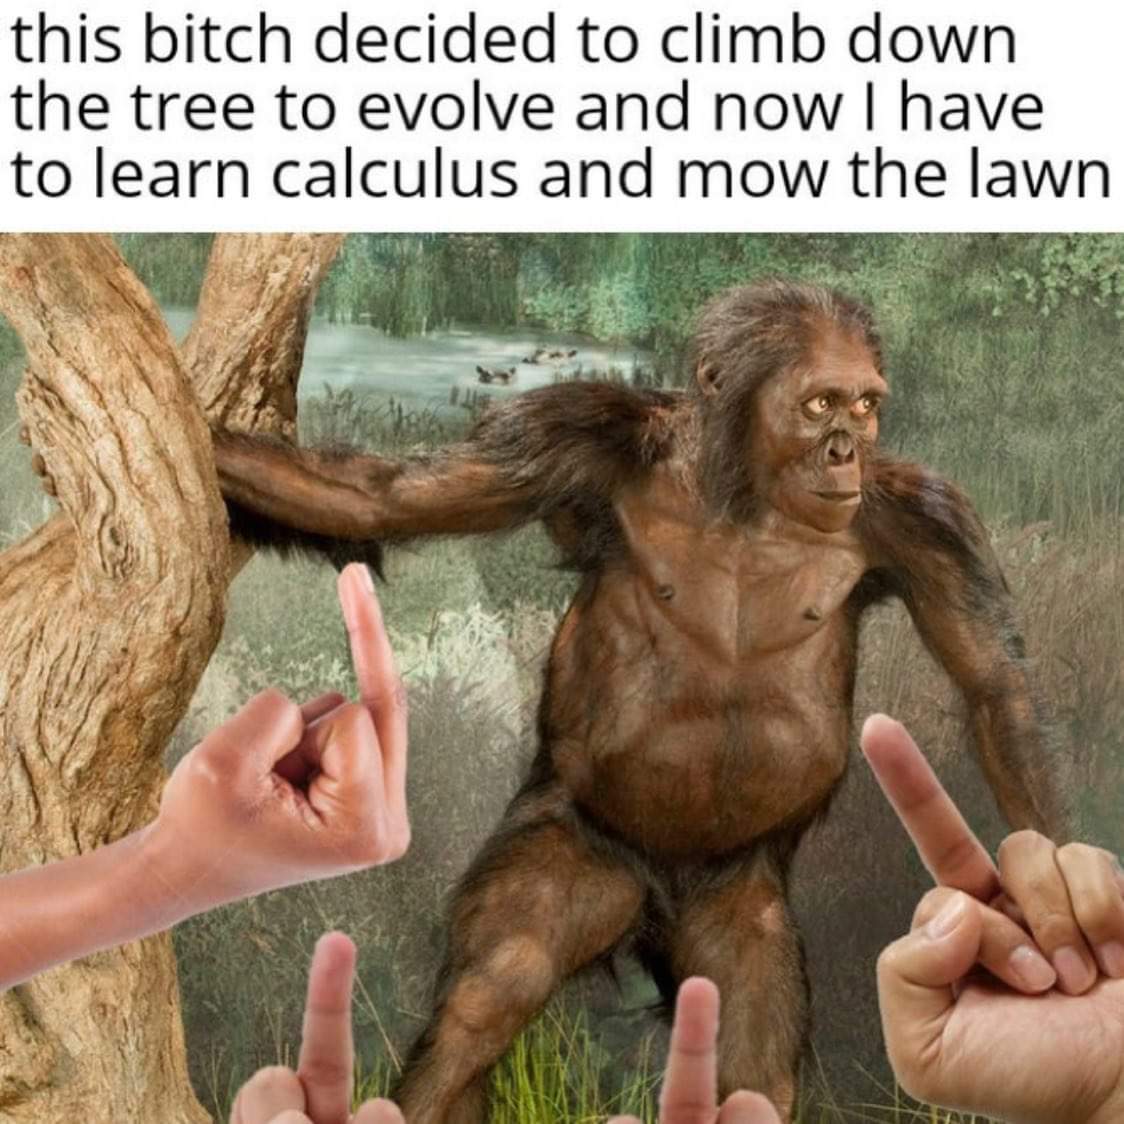 monday morning randomness - australopithecus full body - this bitch decided to climb down the tree to evolve and now I have to learn calculus and mow the lawn